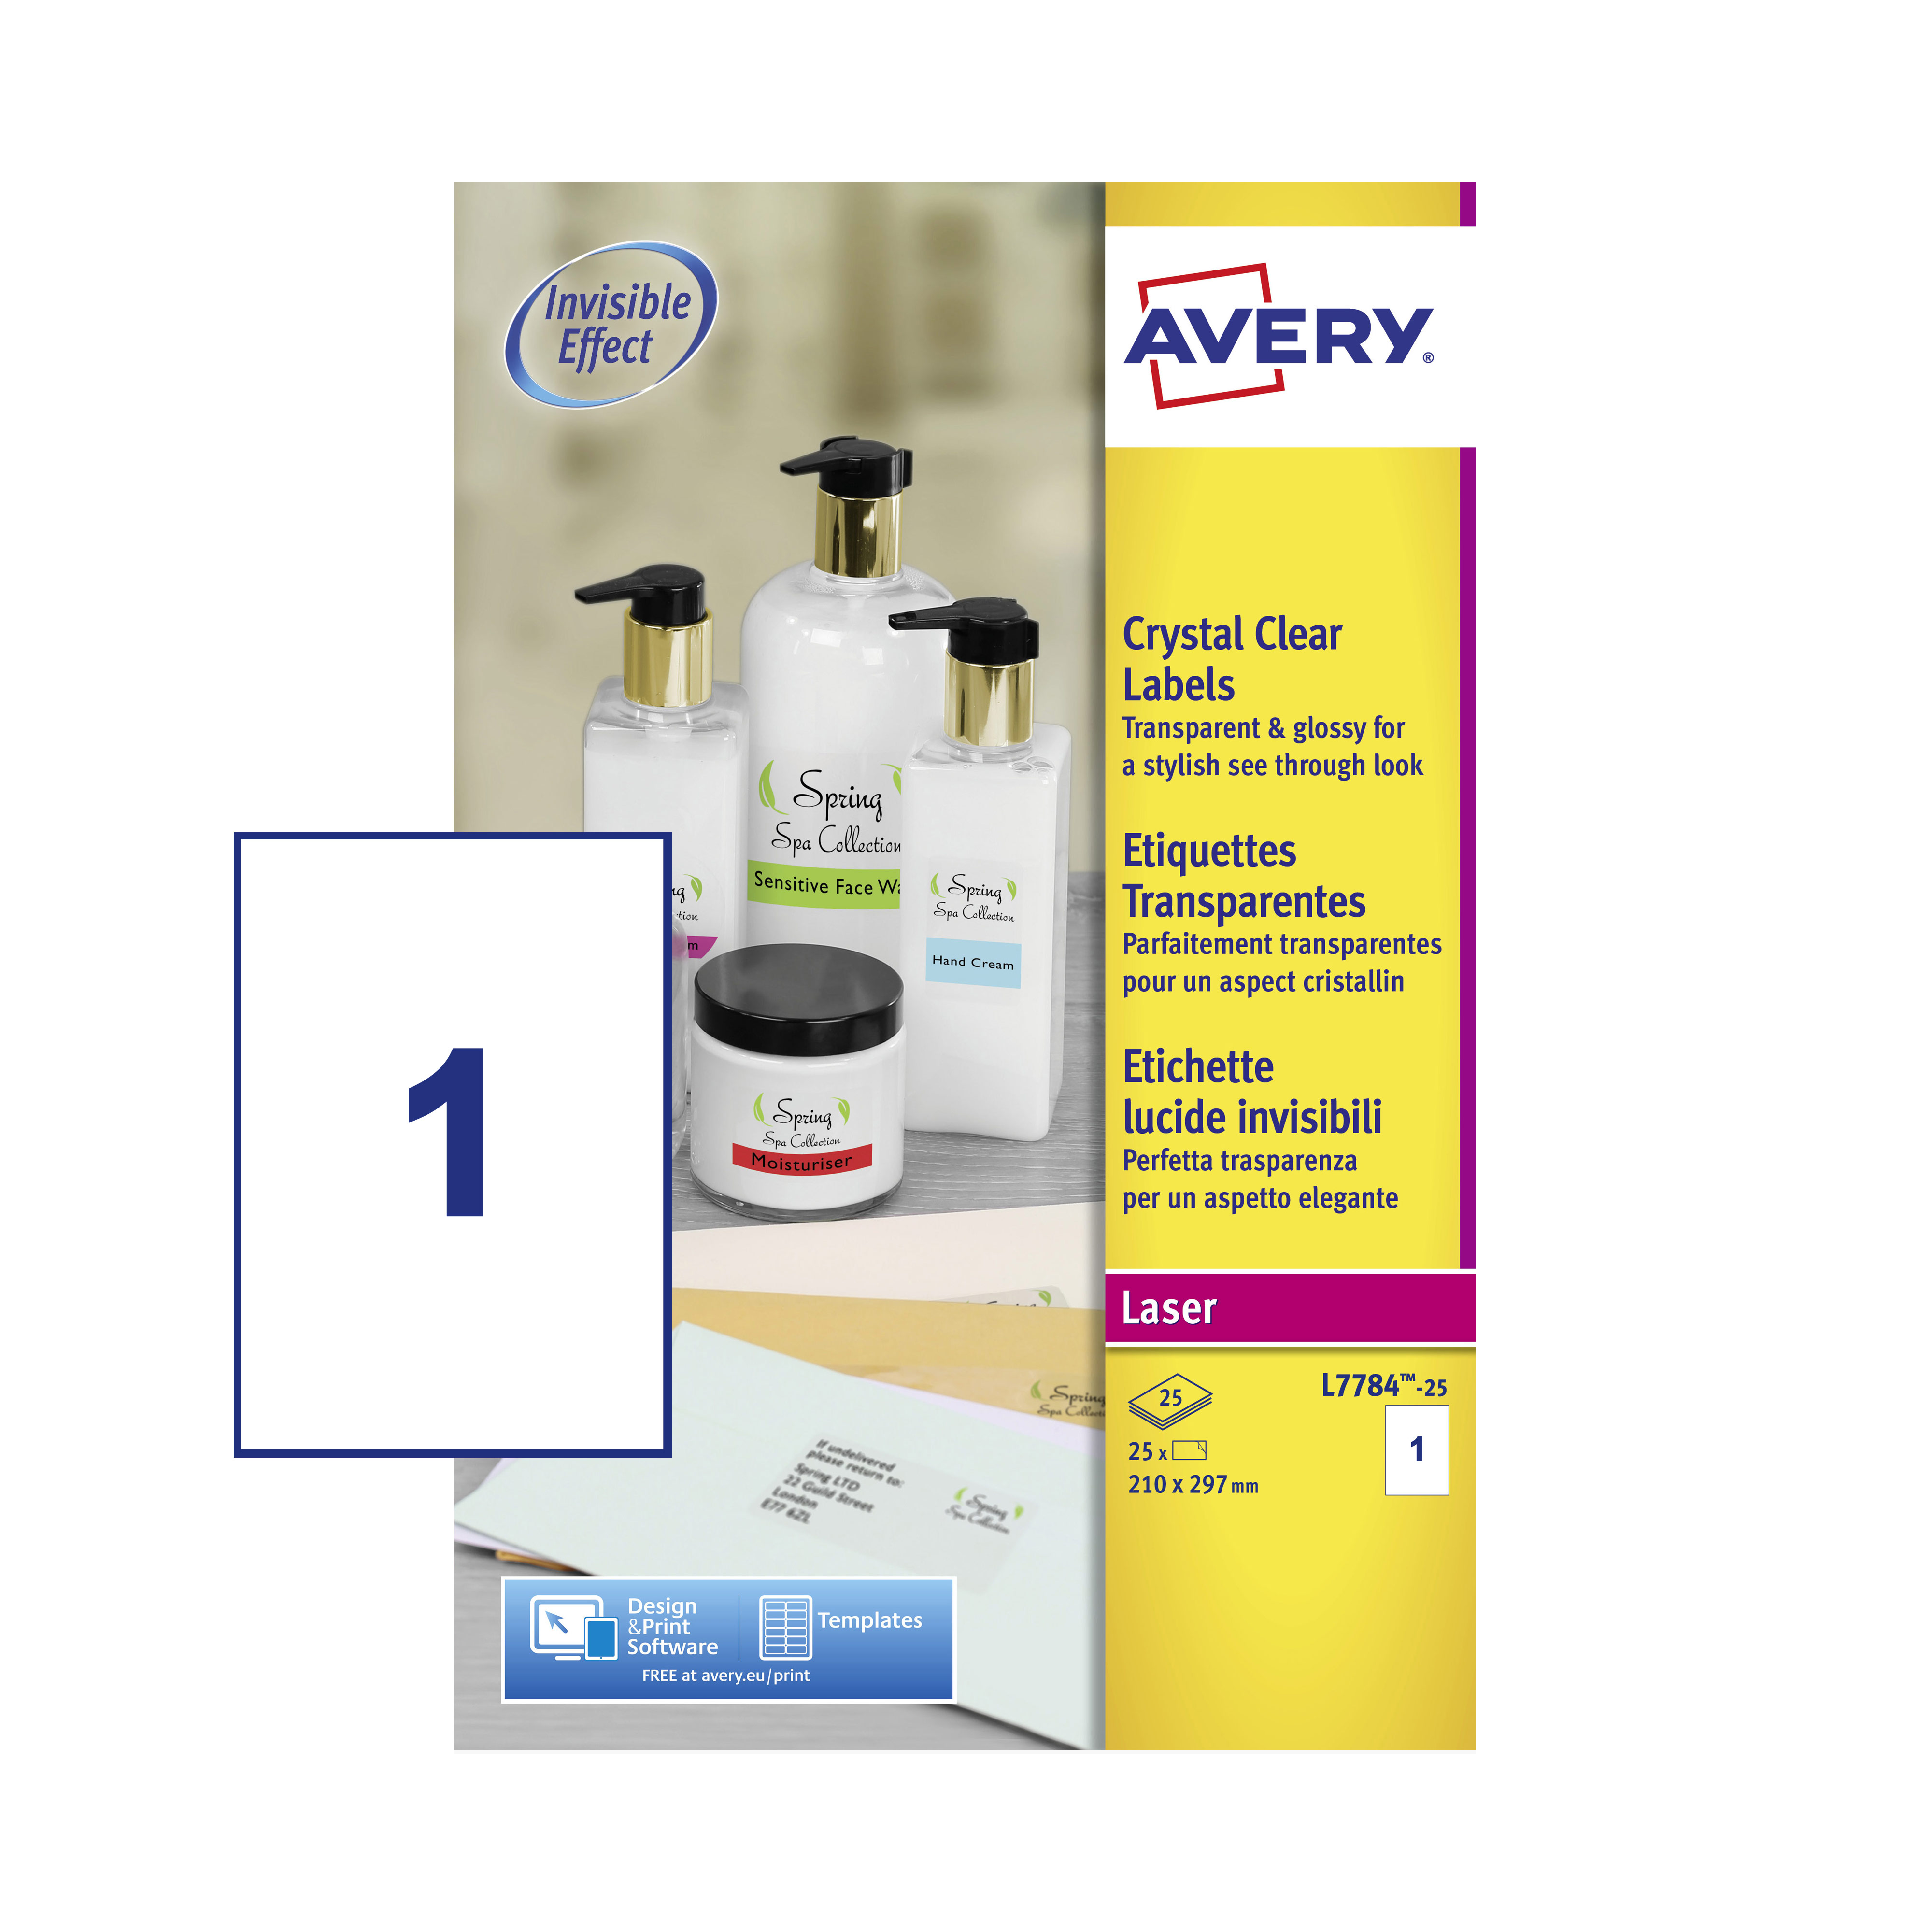 Avery Laser Label 210x297mm 1 Per A4 Sheet Crystal Clear (Pack 25 Labels) L7784-25